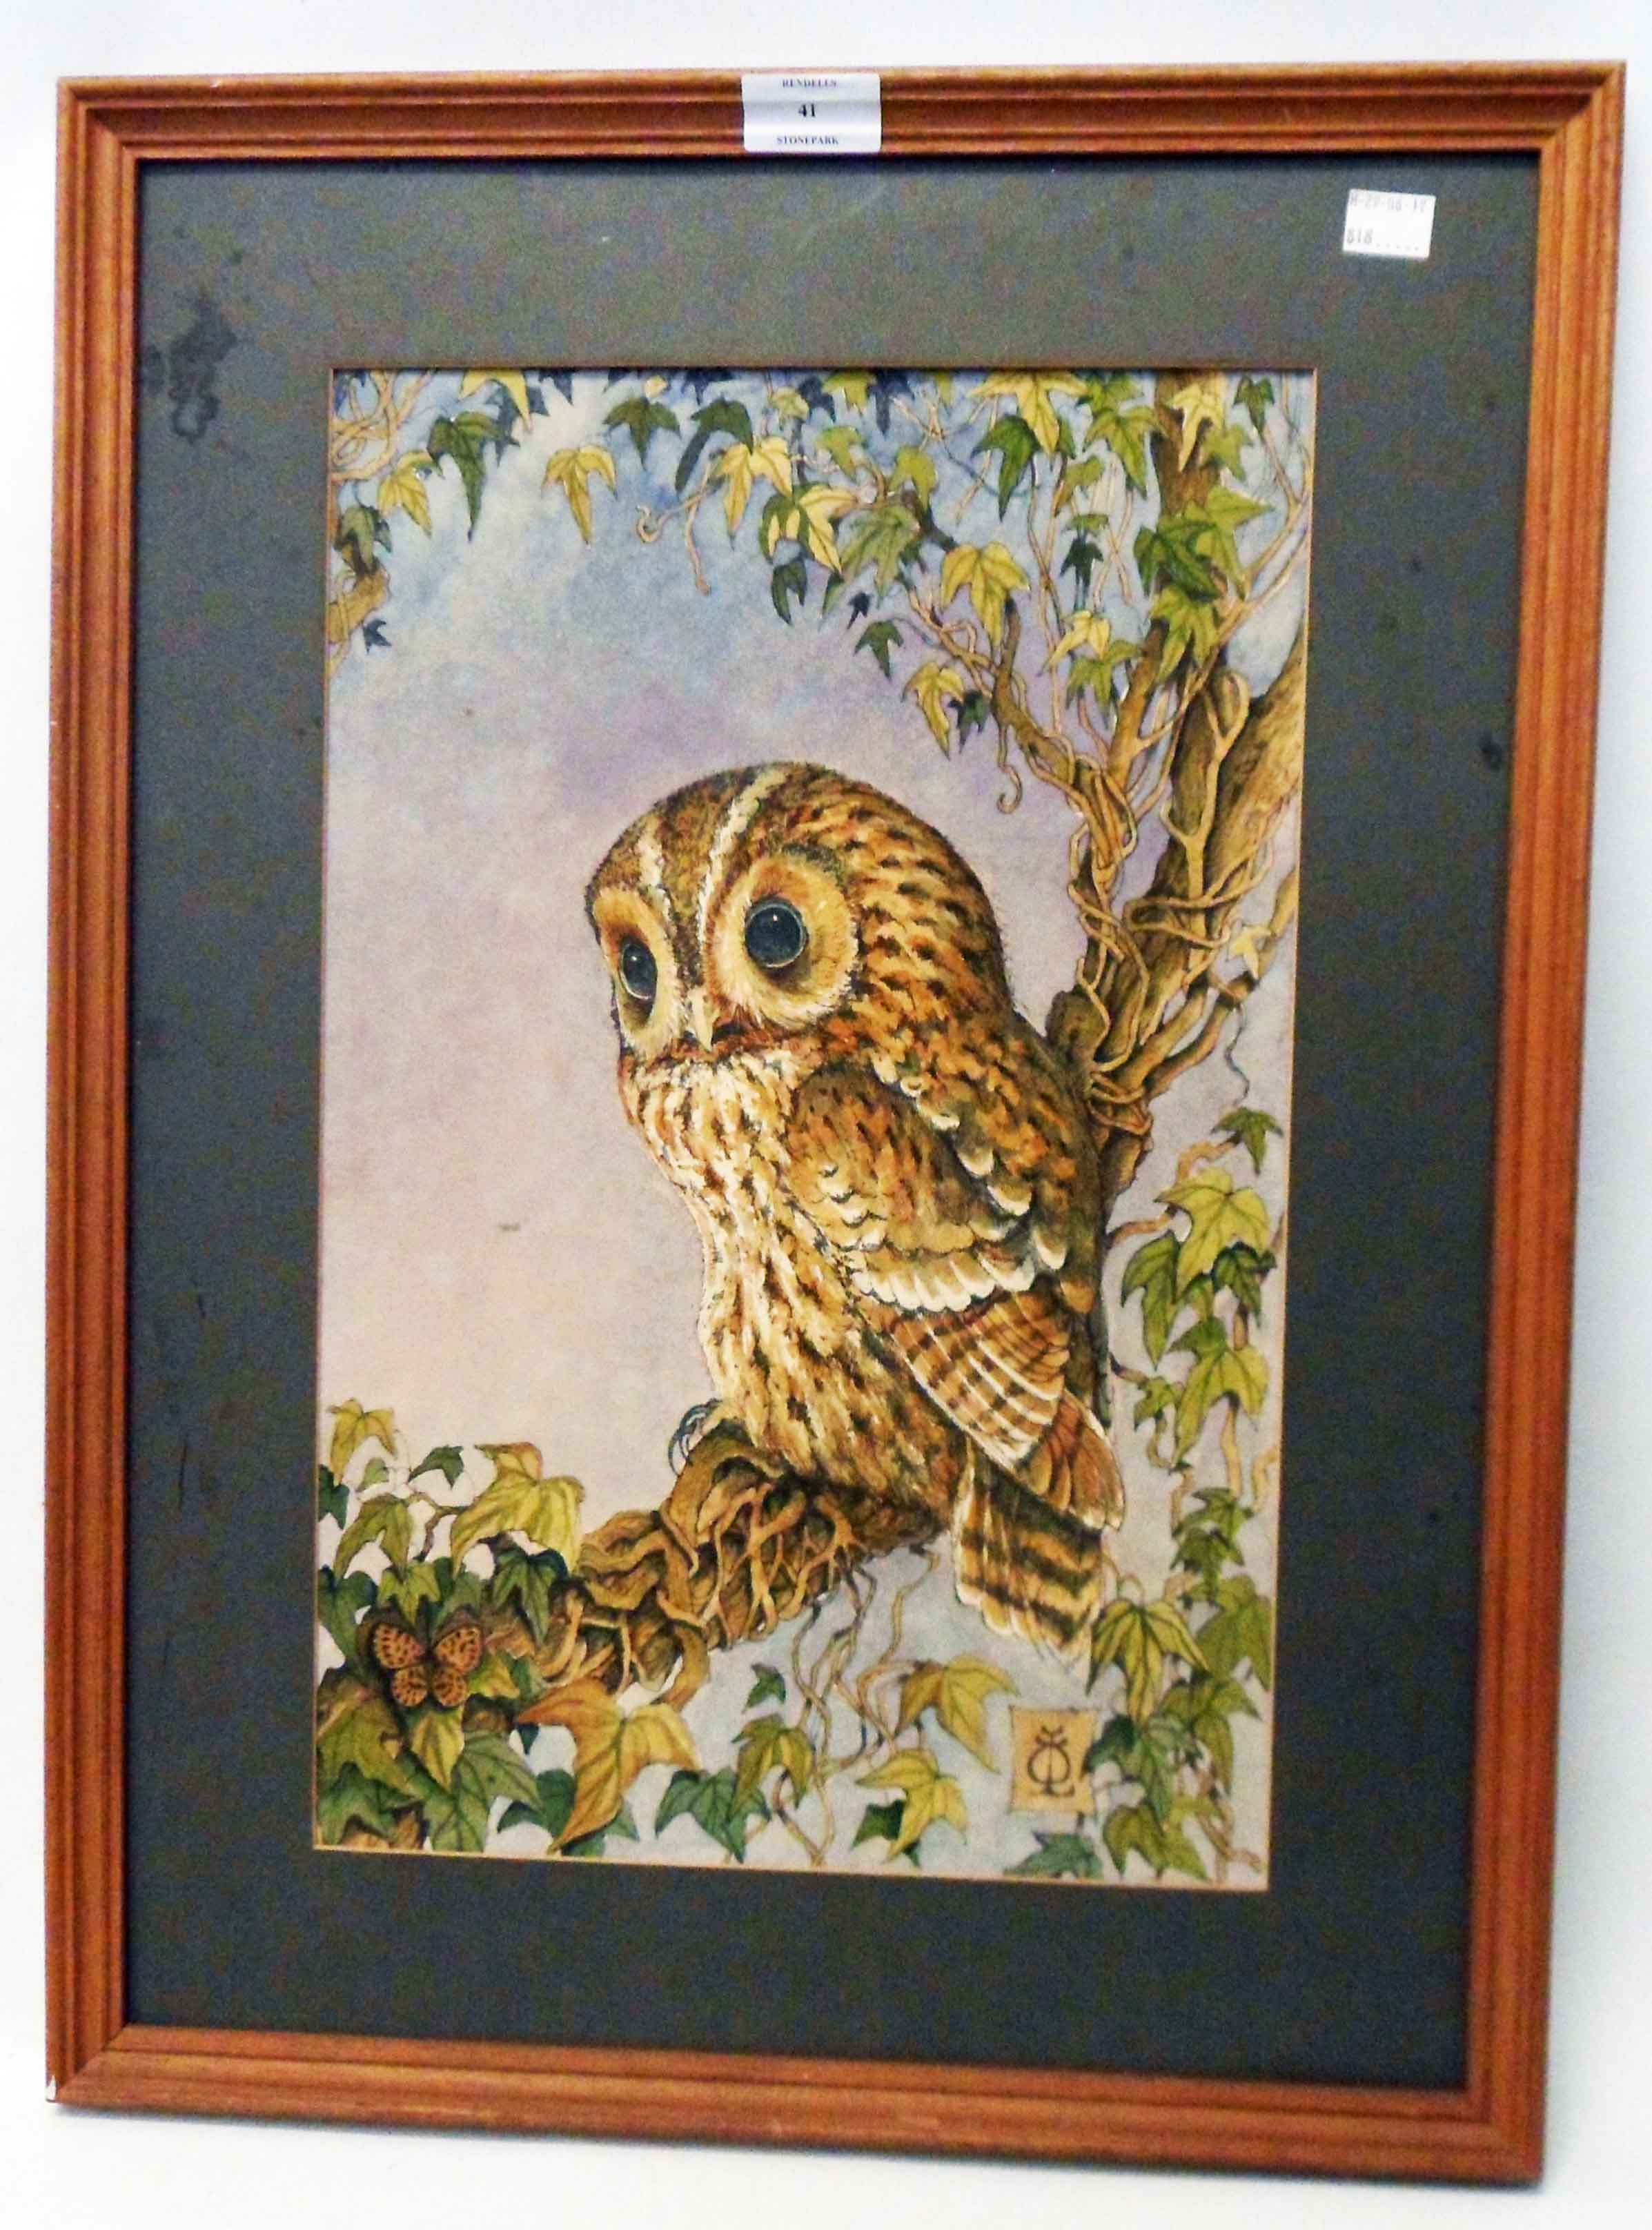 A framed mixed media drawing study of a perching owl - signed with monogram